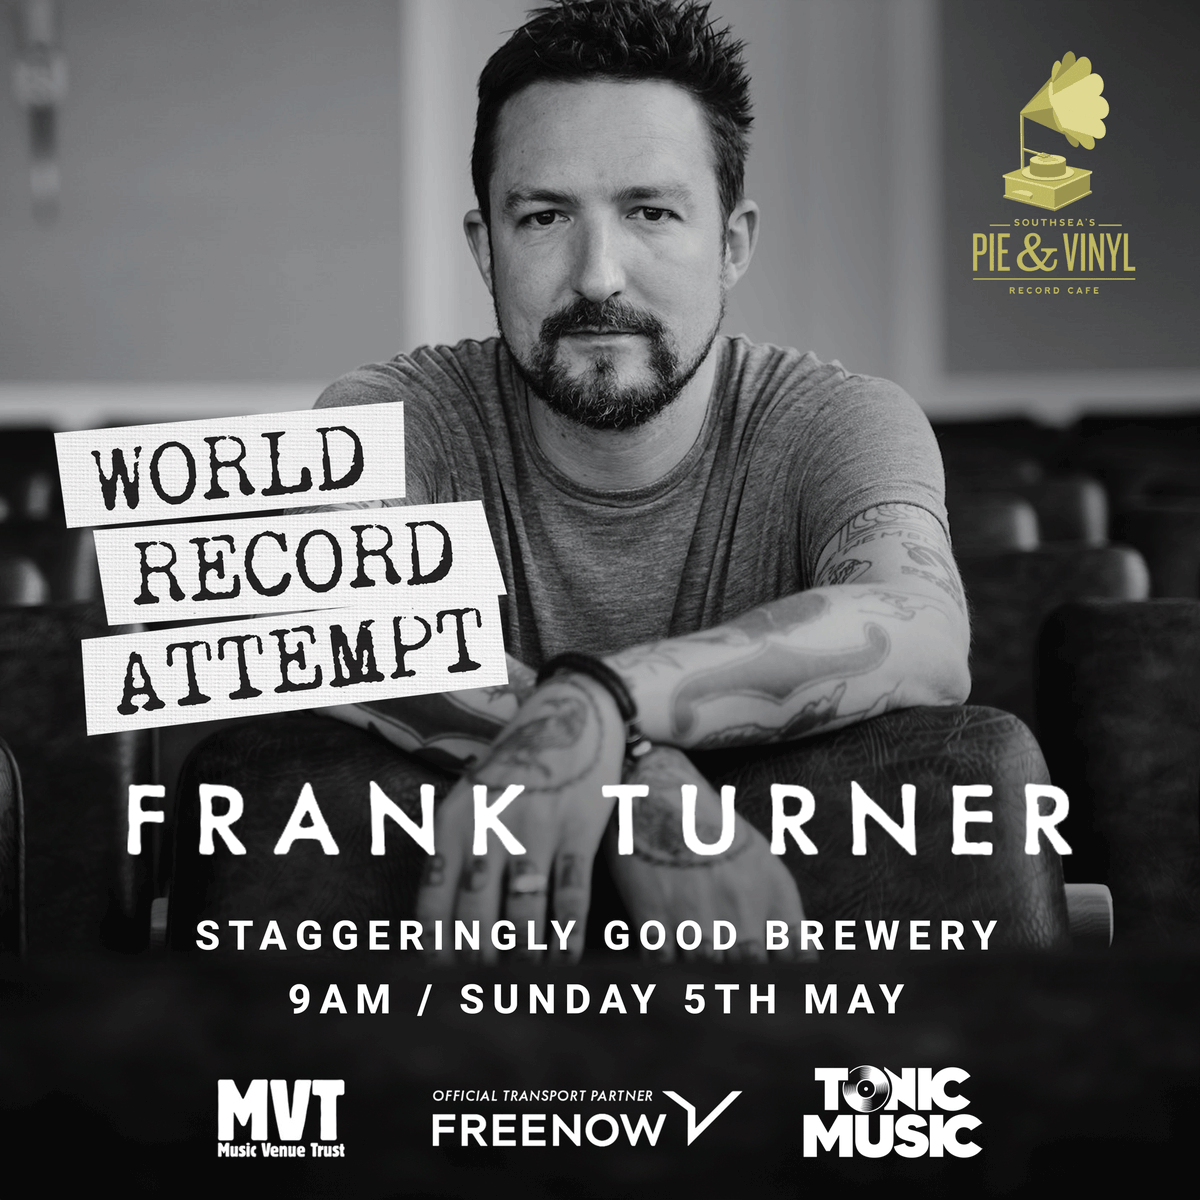 Looking forward to this Sunday and the World Record attempt by @FrankTurner to play the most number of shows in different cities in a 24 hour period with @StaggeringBeer and Southsea's Pie & Vinyl. Alarm clocks set for this one! #MentalHealth #Tonic #Music #Wellbeing